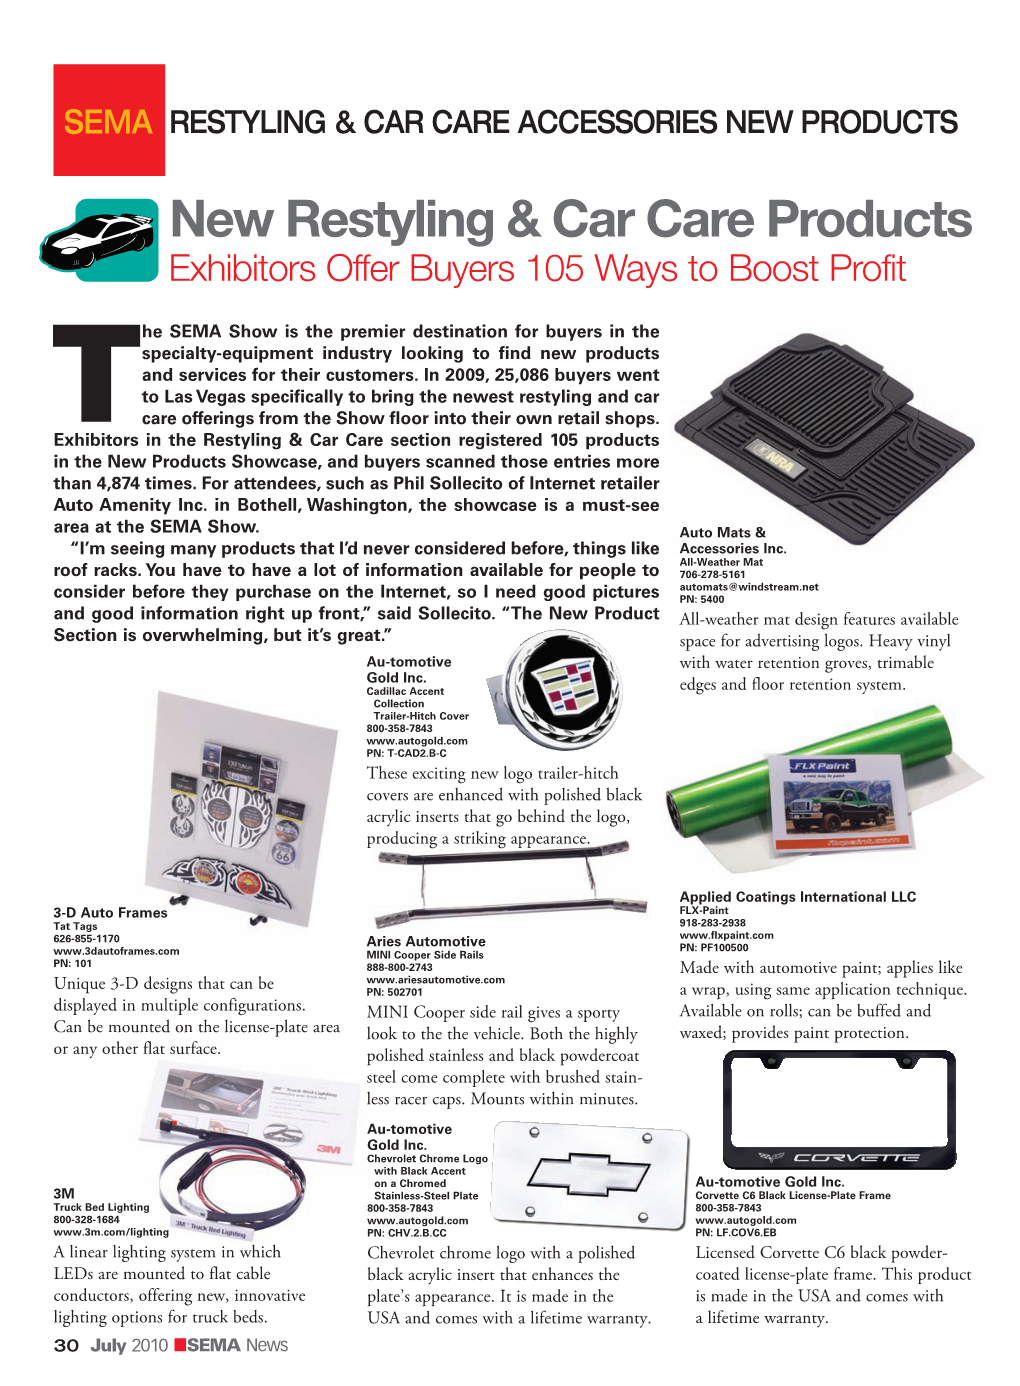 New Restyling & Car Care Products